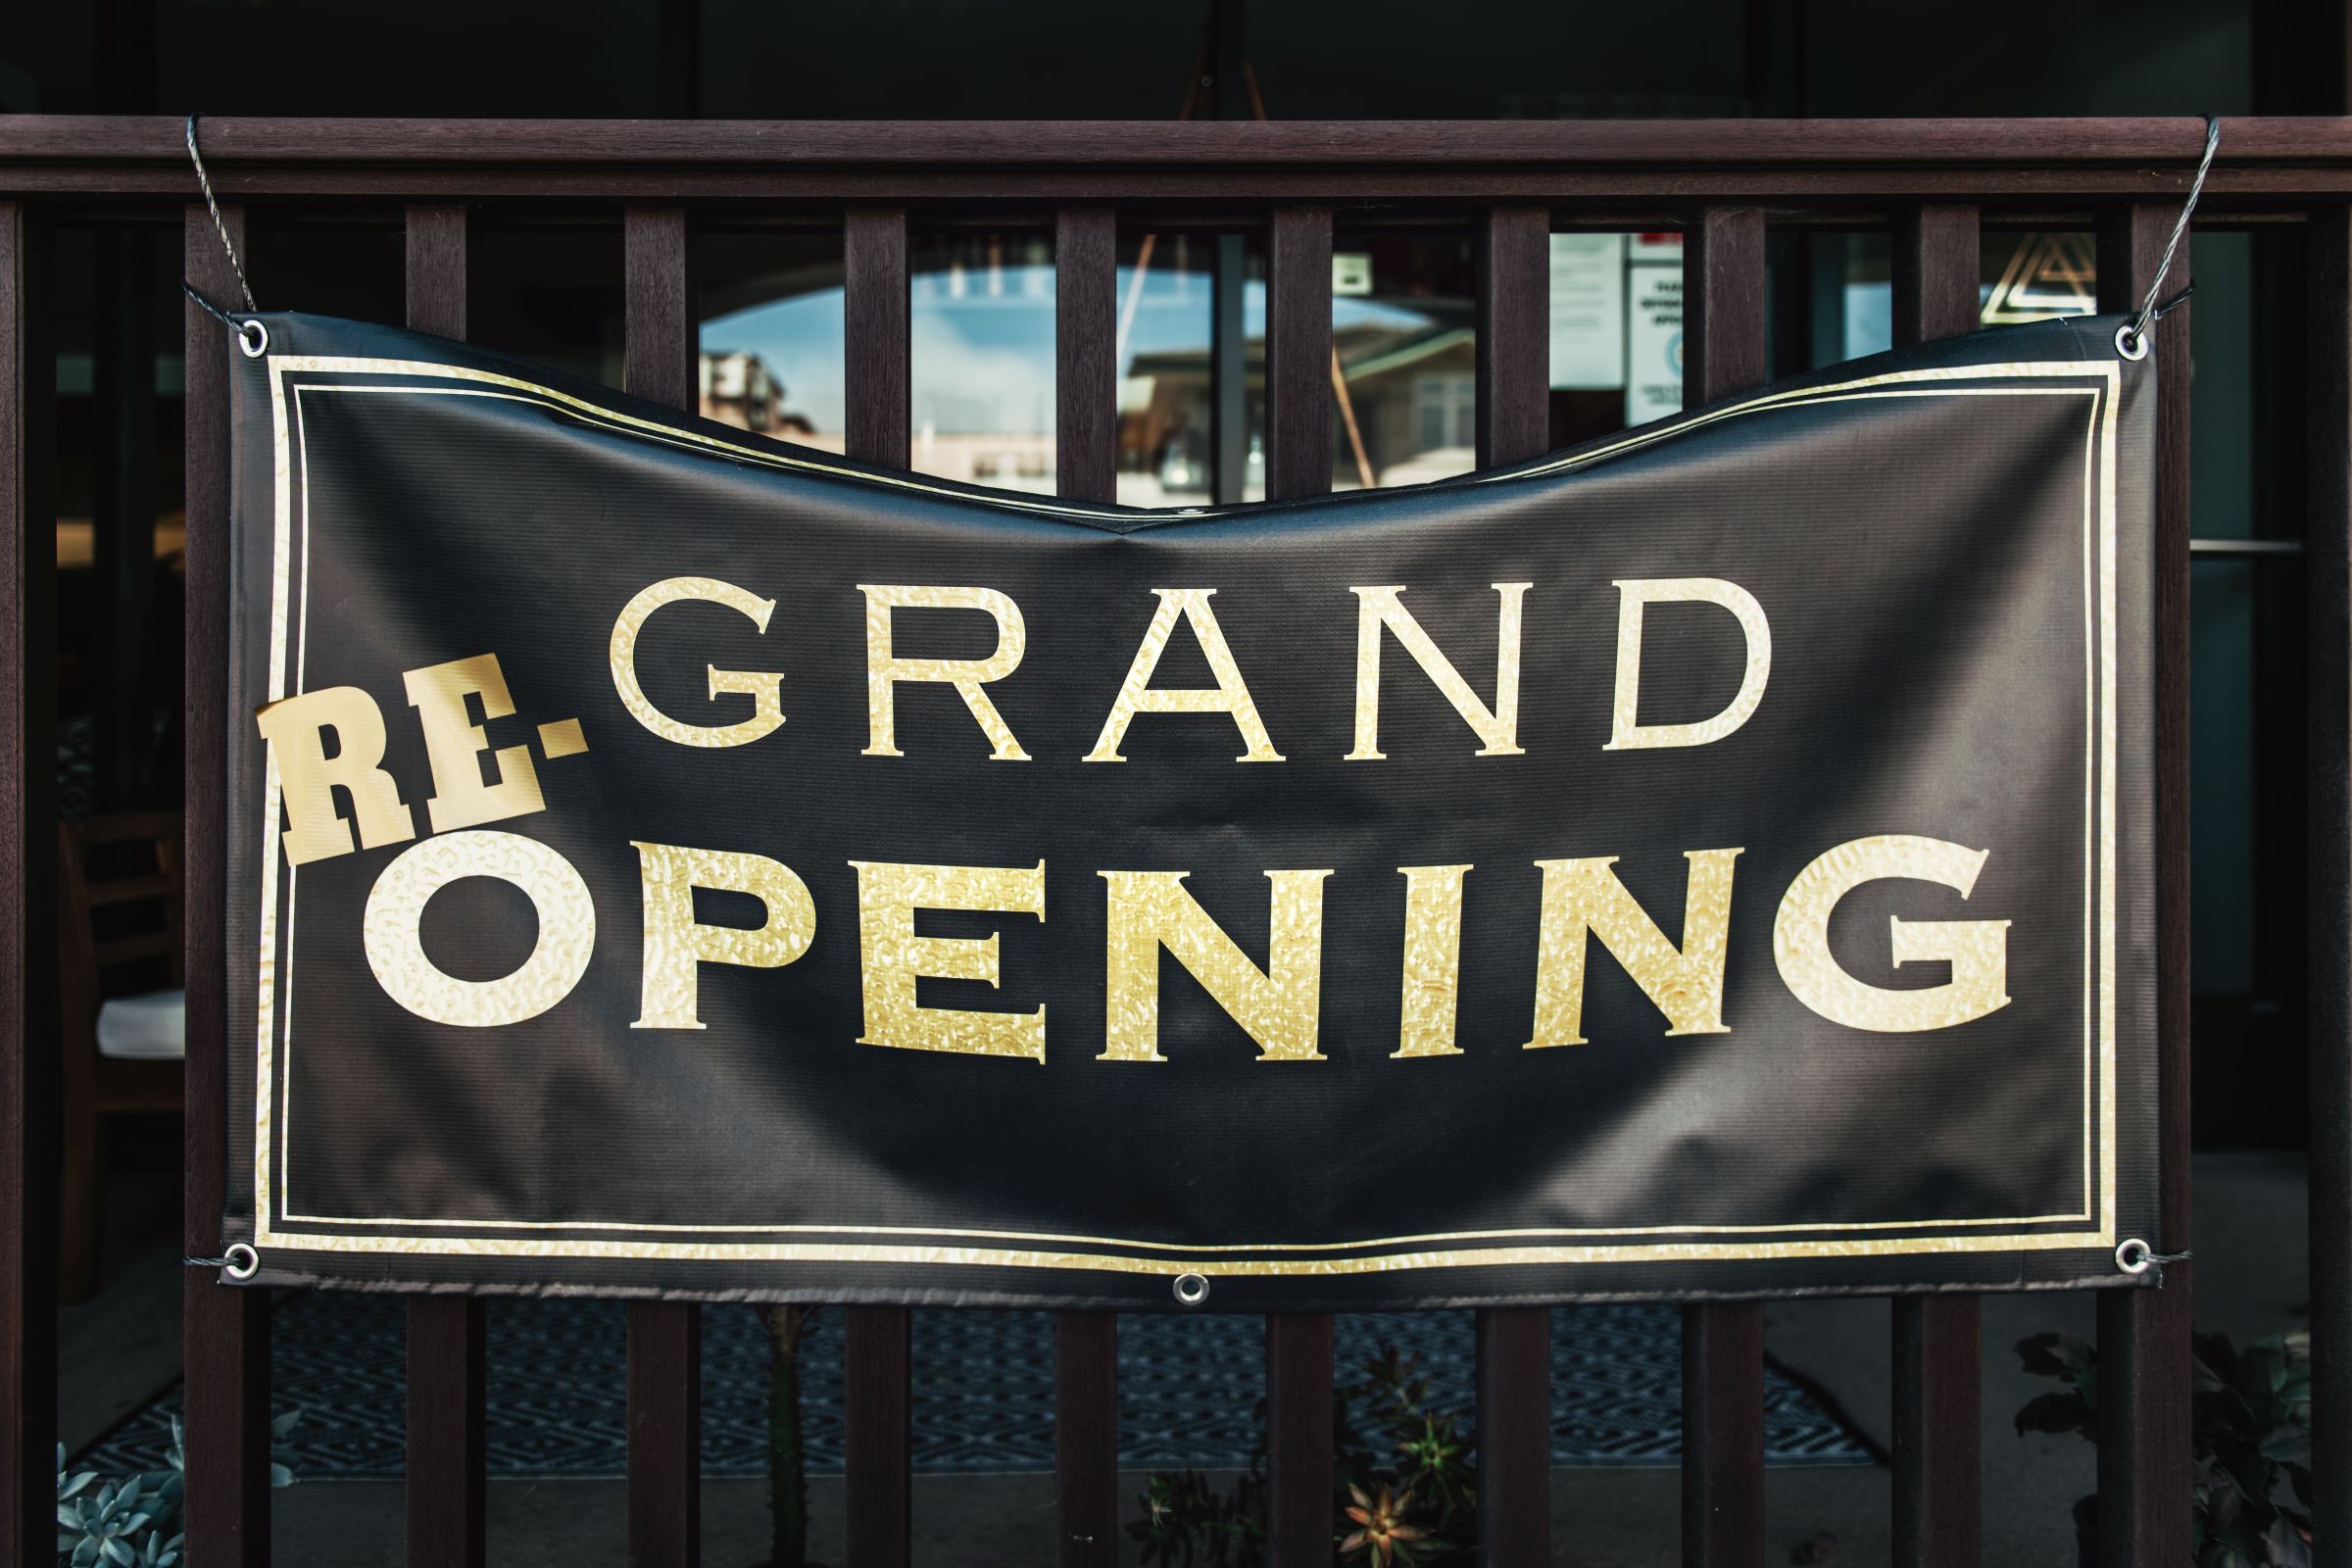 A "Grand re-opening" sign.